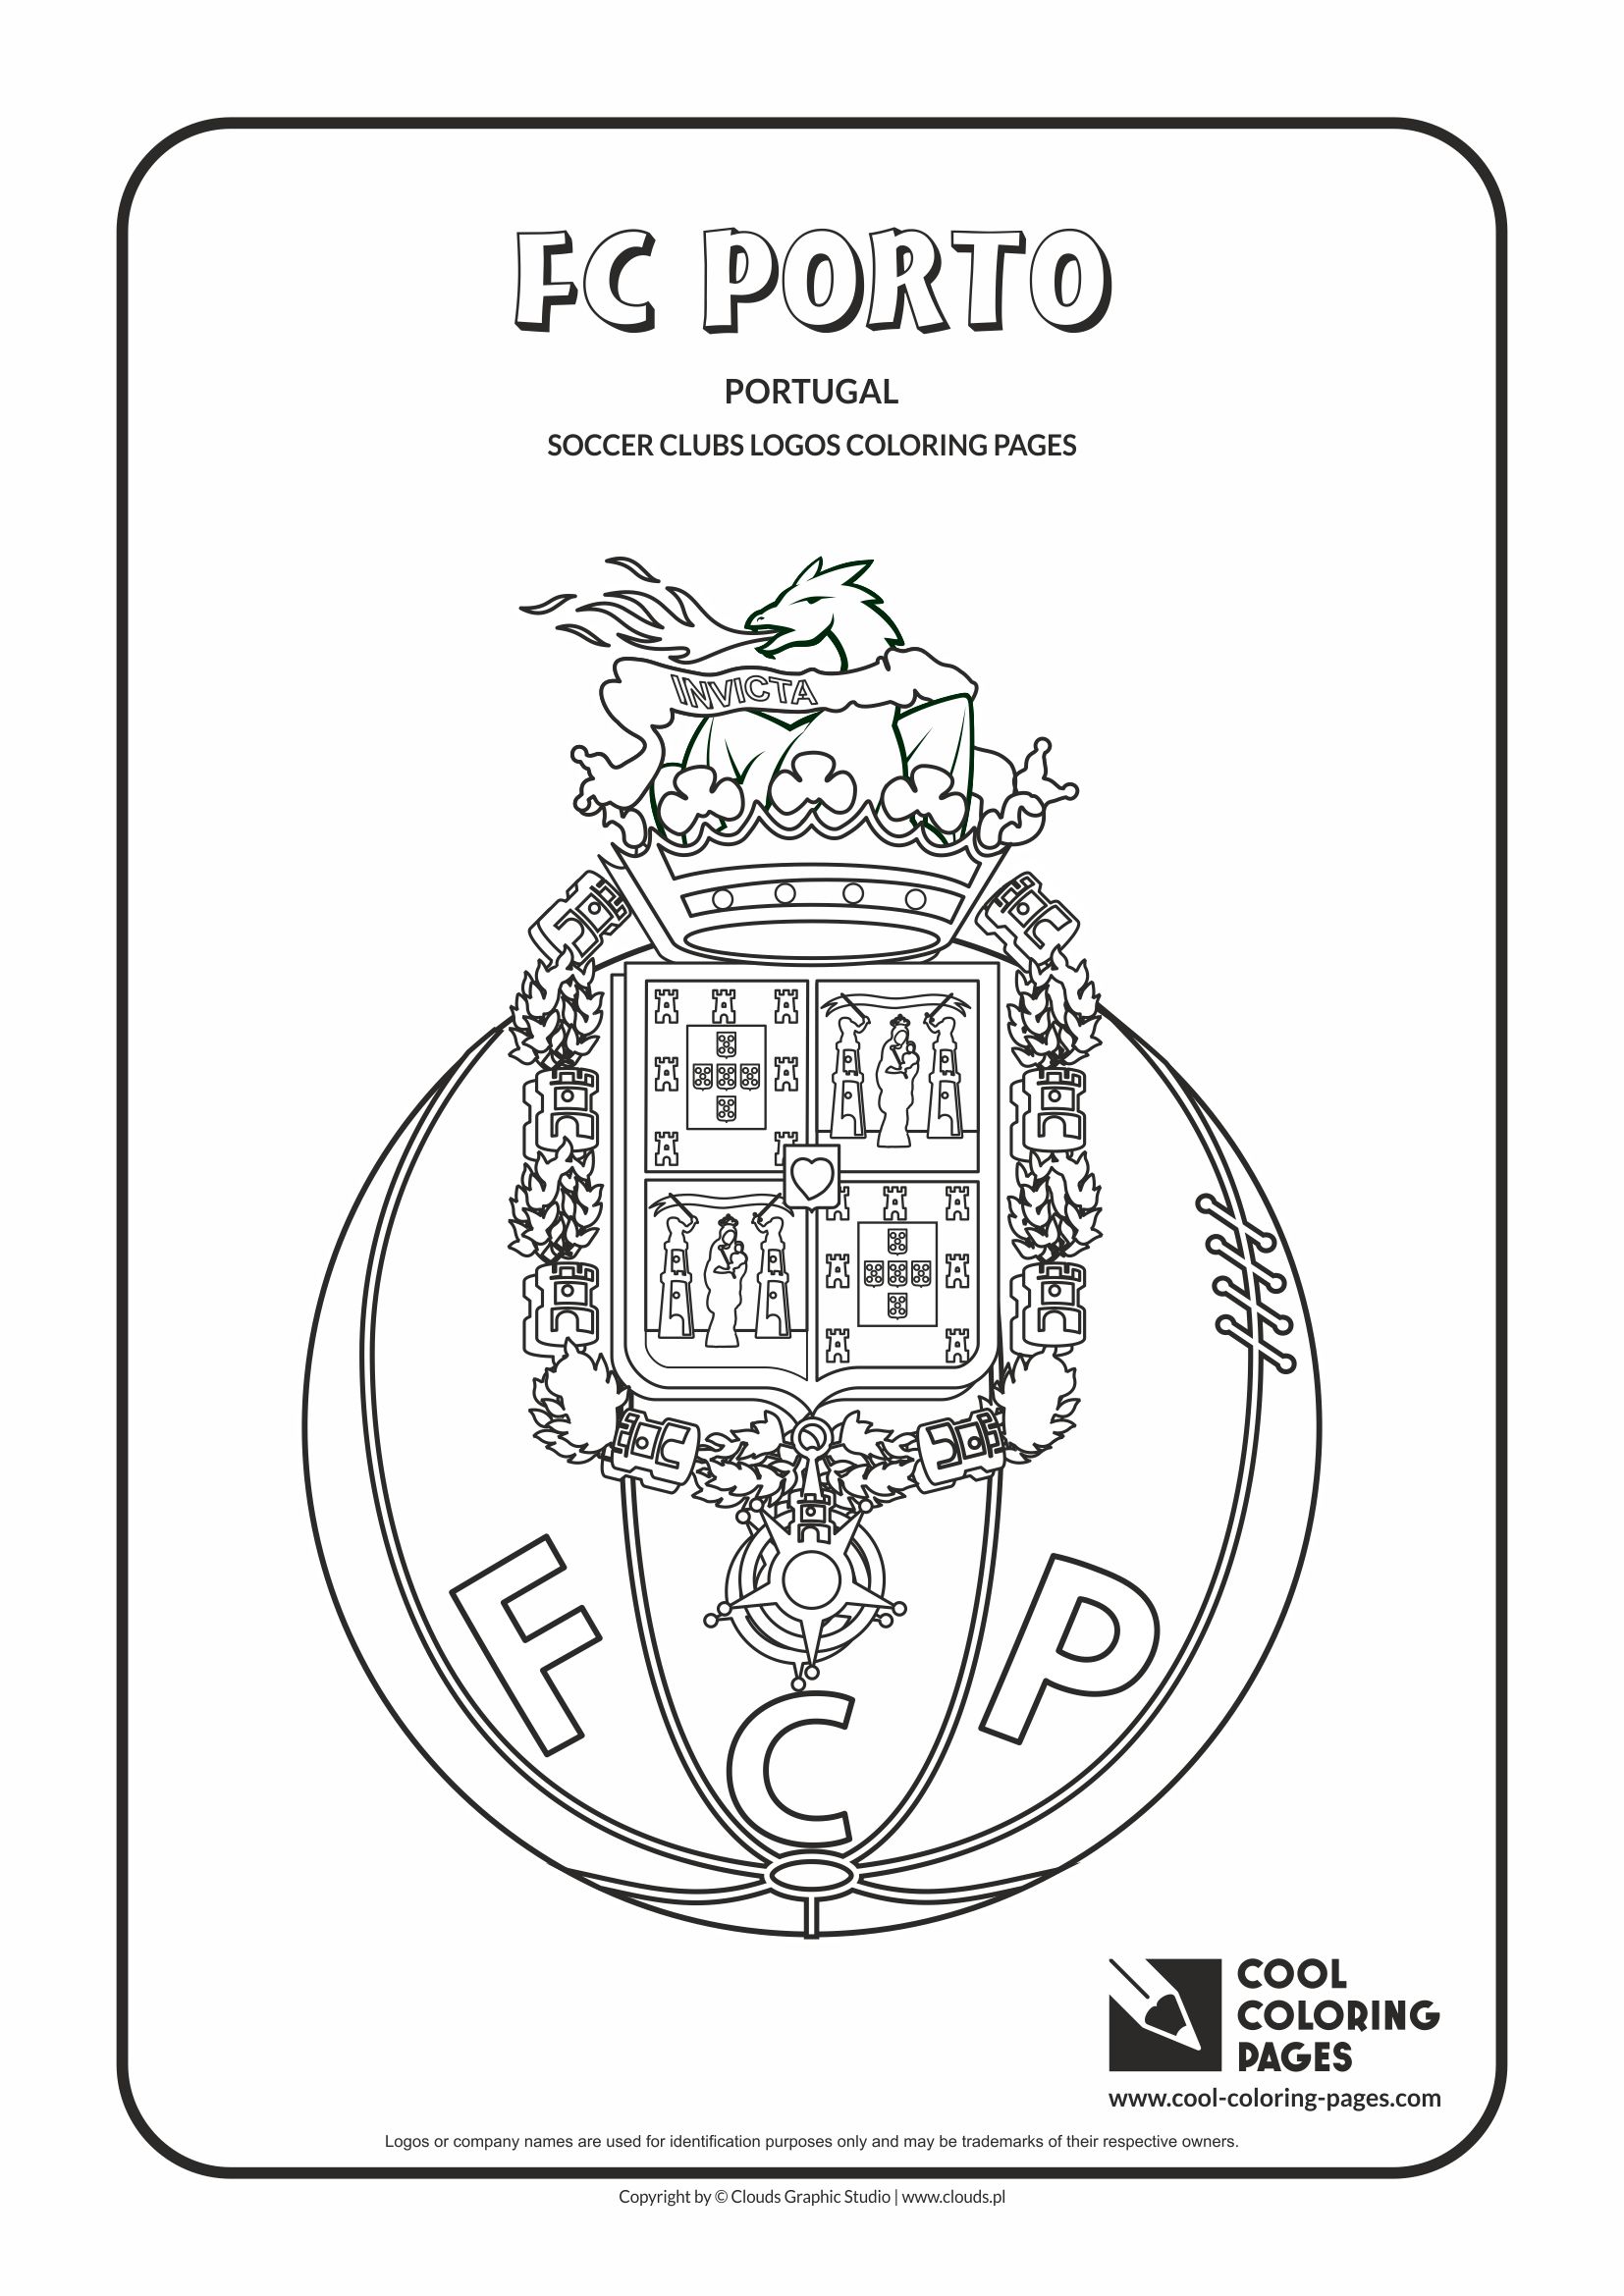 Download Cool Coloring Pages Soccer clubs logos - Cool Coloring Pages | Free educational coloring pages ...